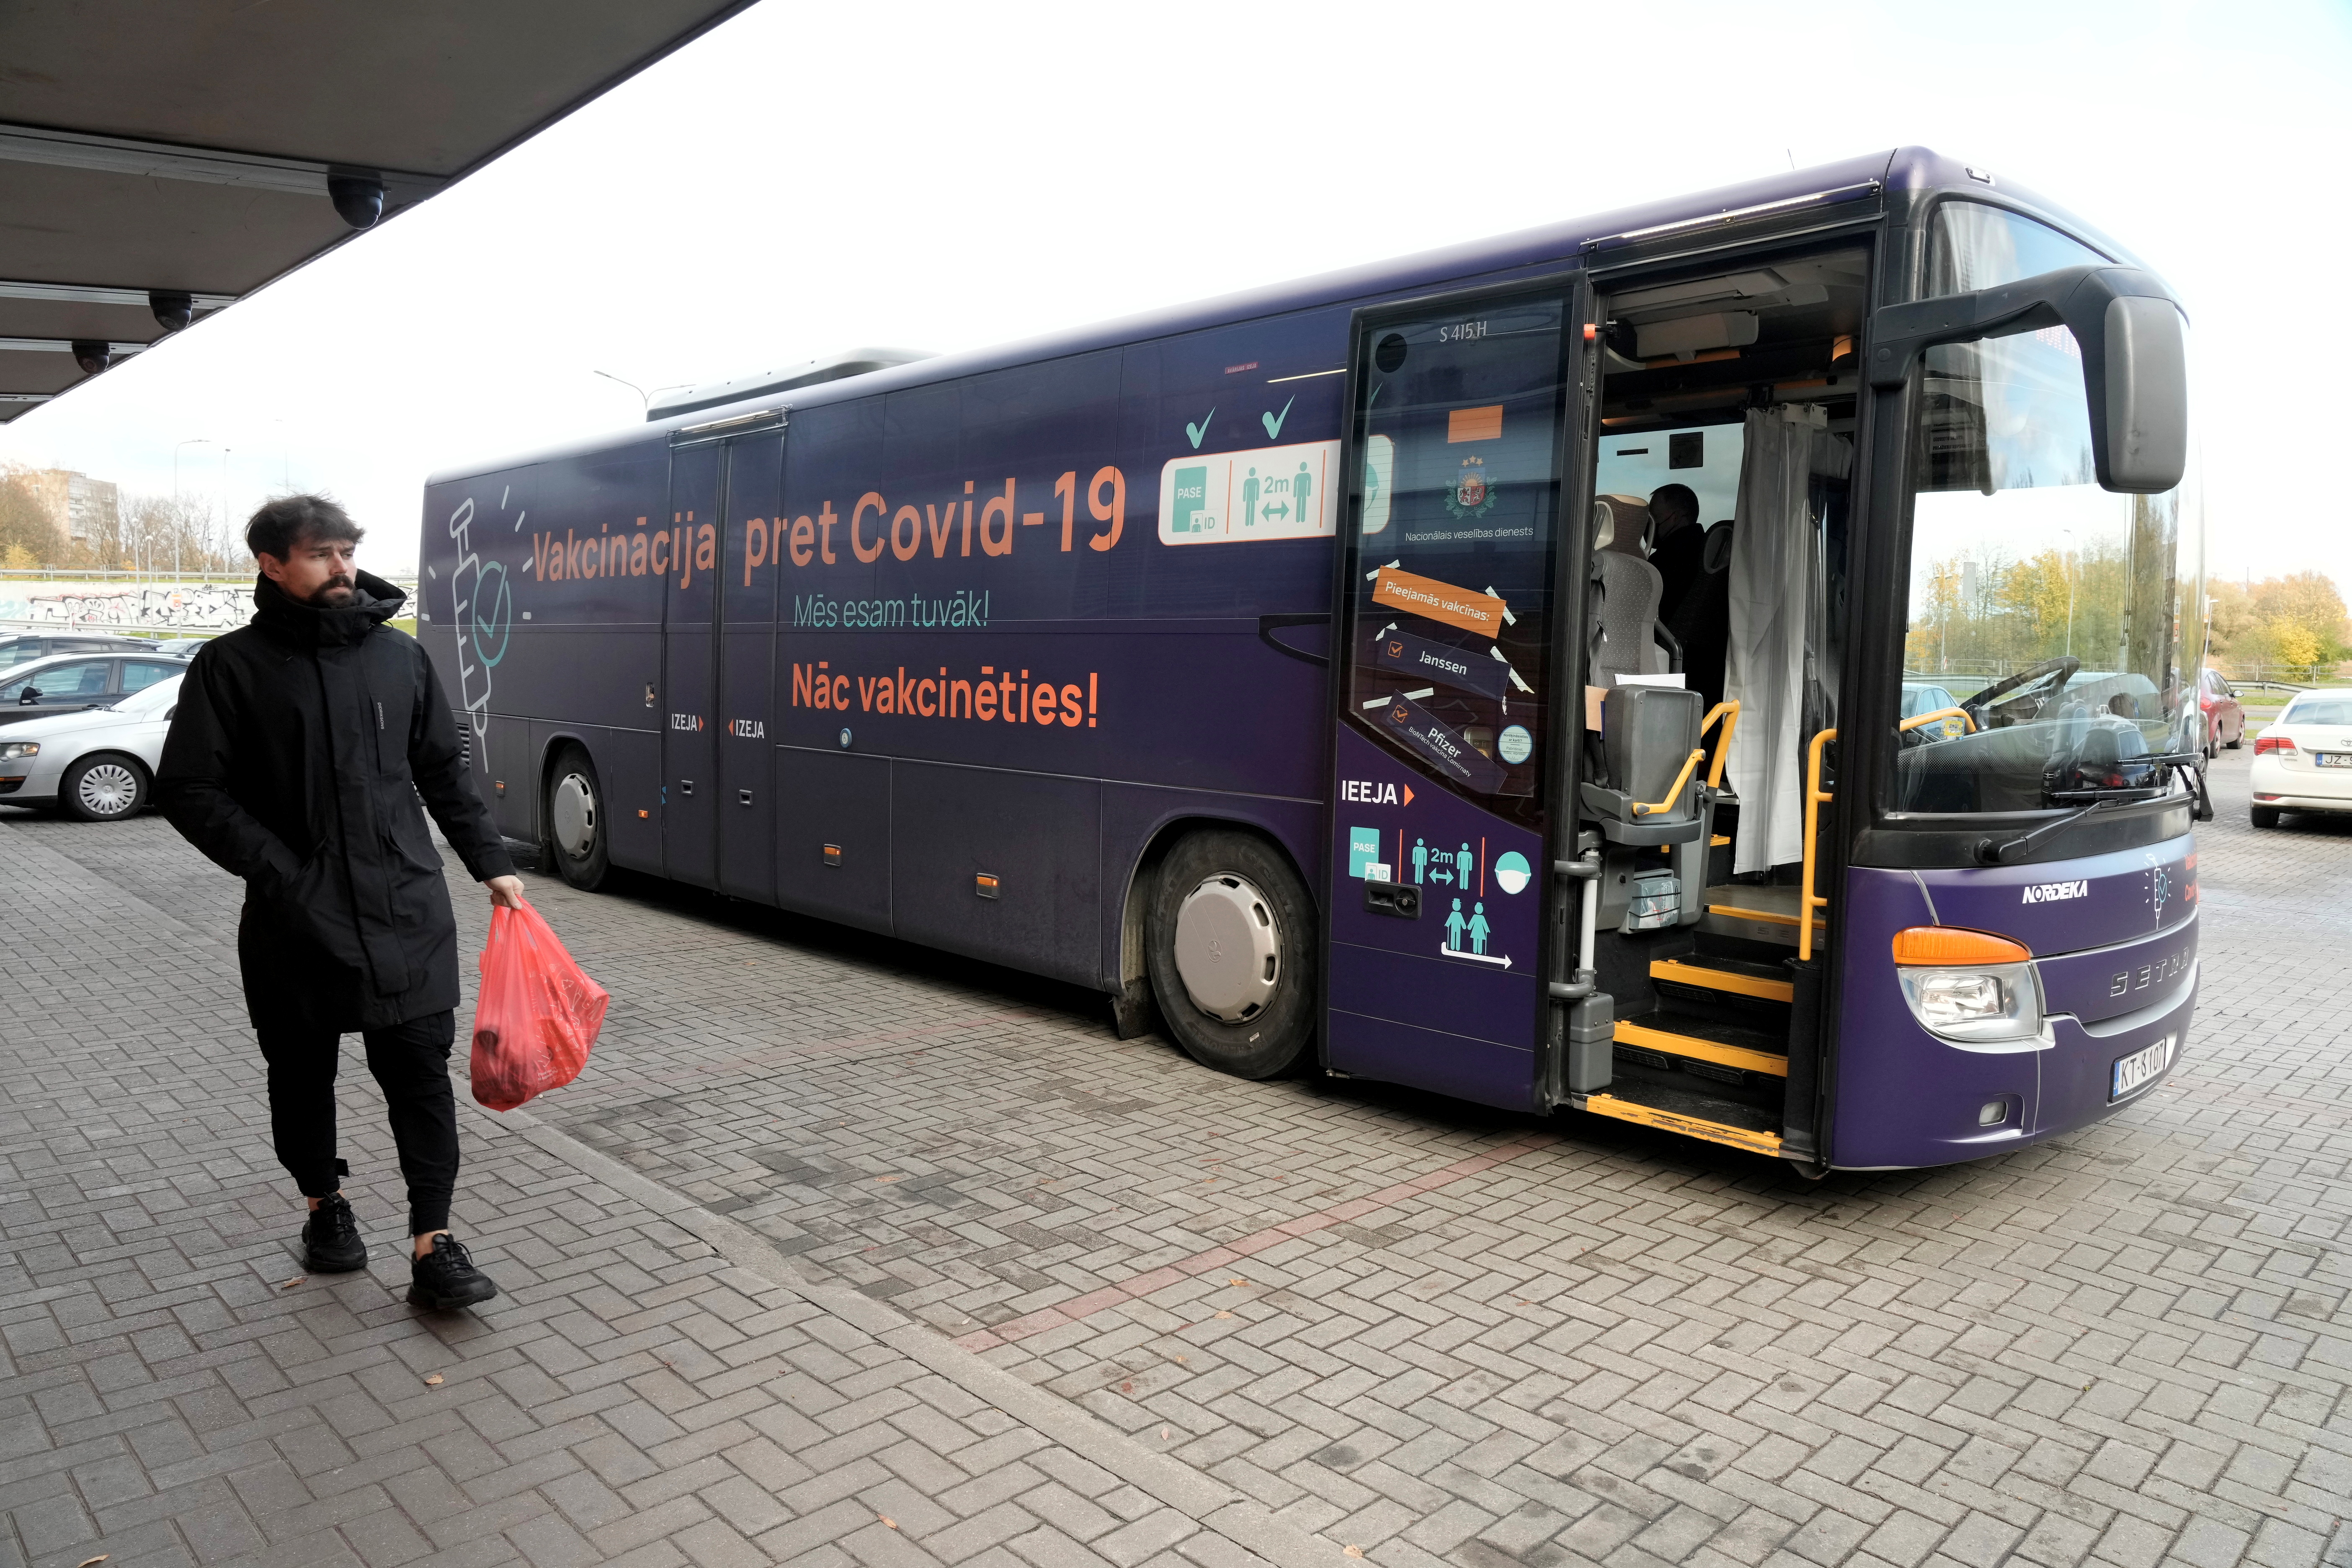 A man walks past a mobile coronavirus disease (COVID-19) vaccination bus next to the shopping center in Riga, Latvia October 19, 2021. Signs on a bus read 